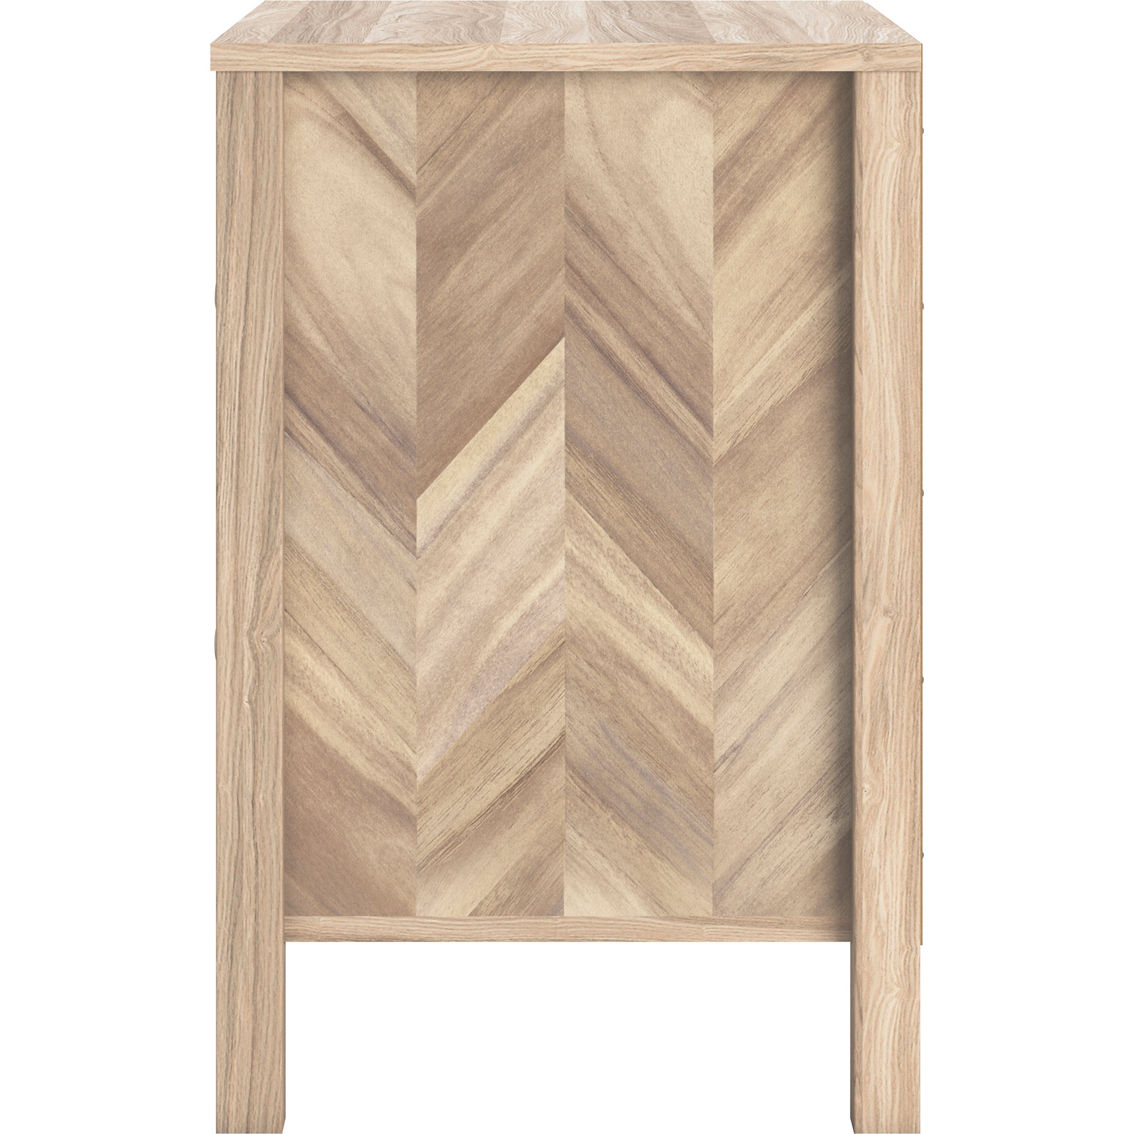 Signature Design by Ashley Battelle Ready-To-Assemble Nightstand - Image 6 of 7